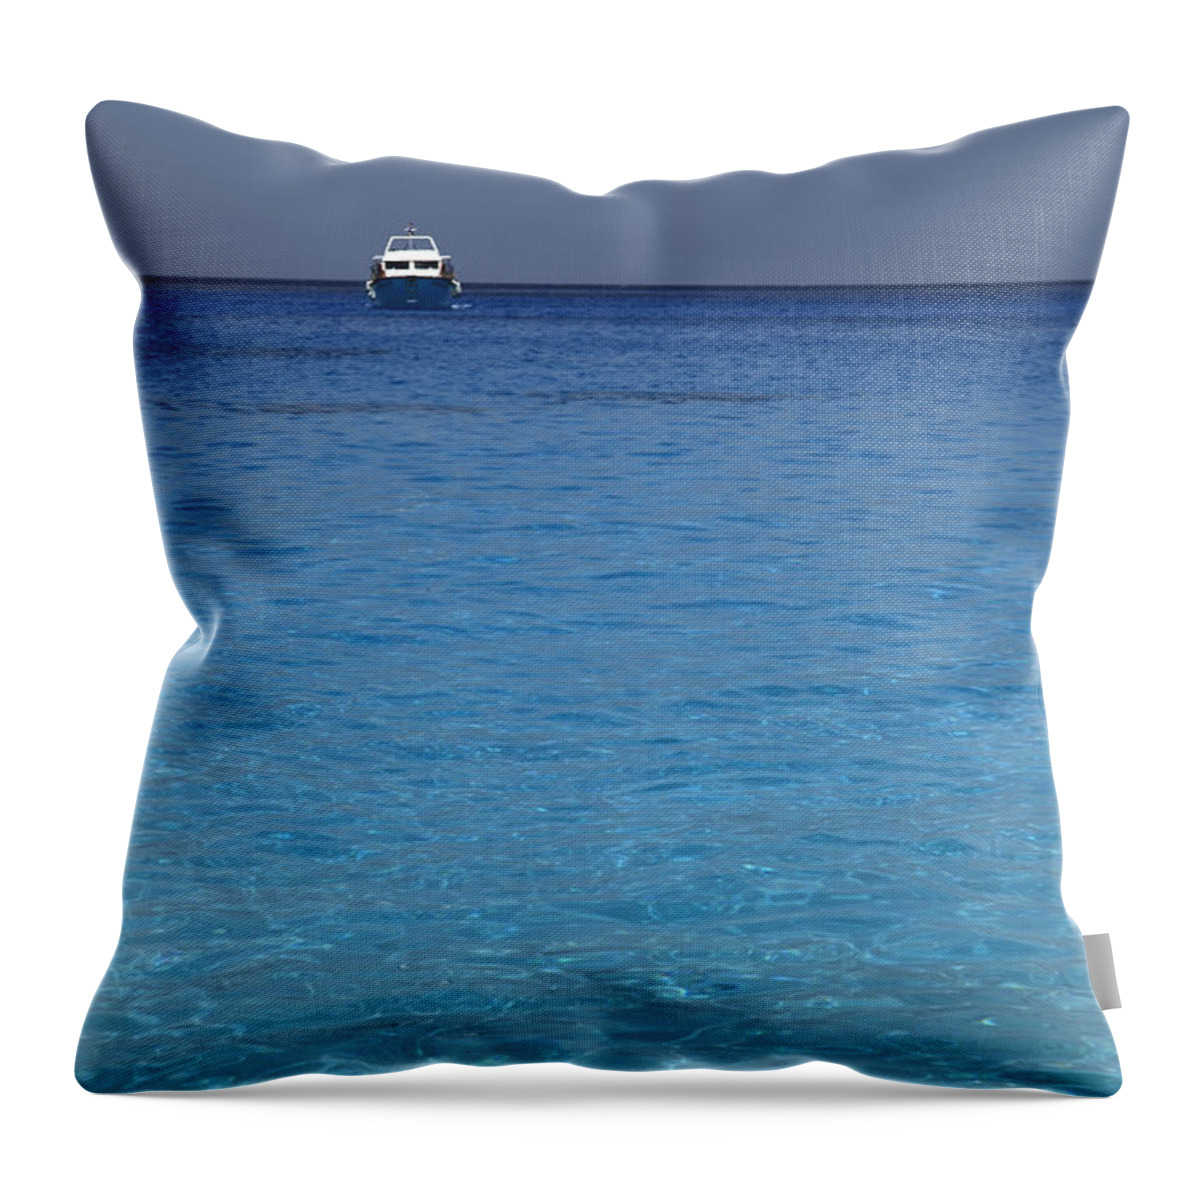 Vertical Throw Pillow featuring the photograph Blue Boat by Milena Boeva